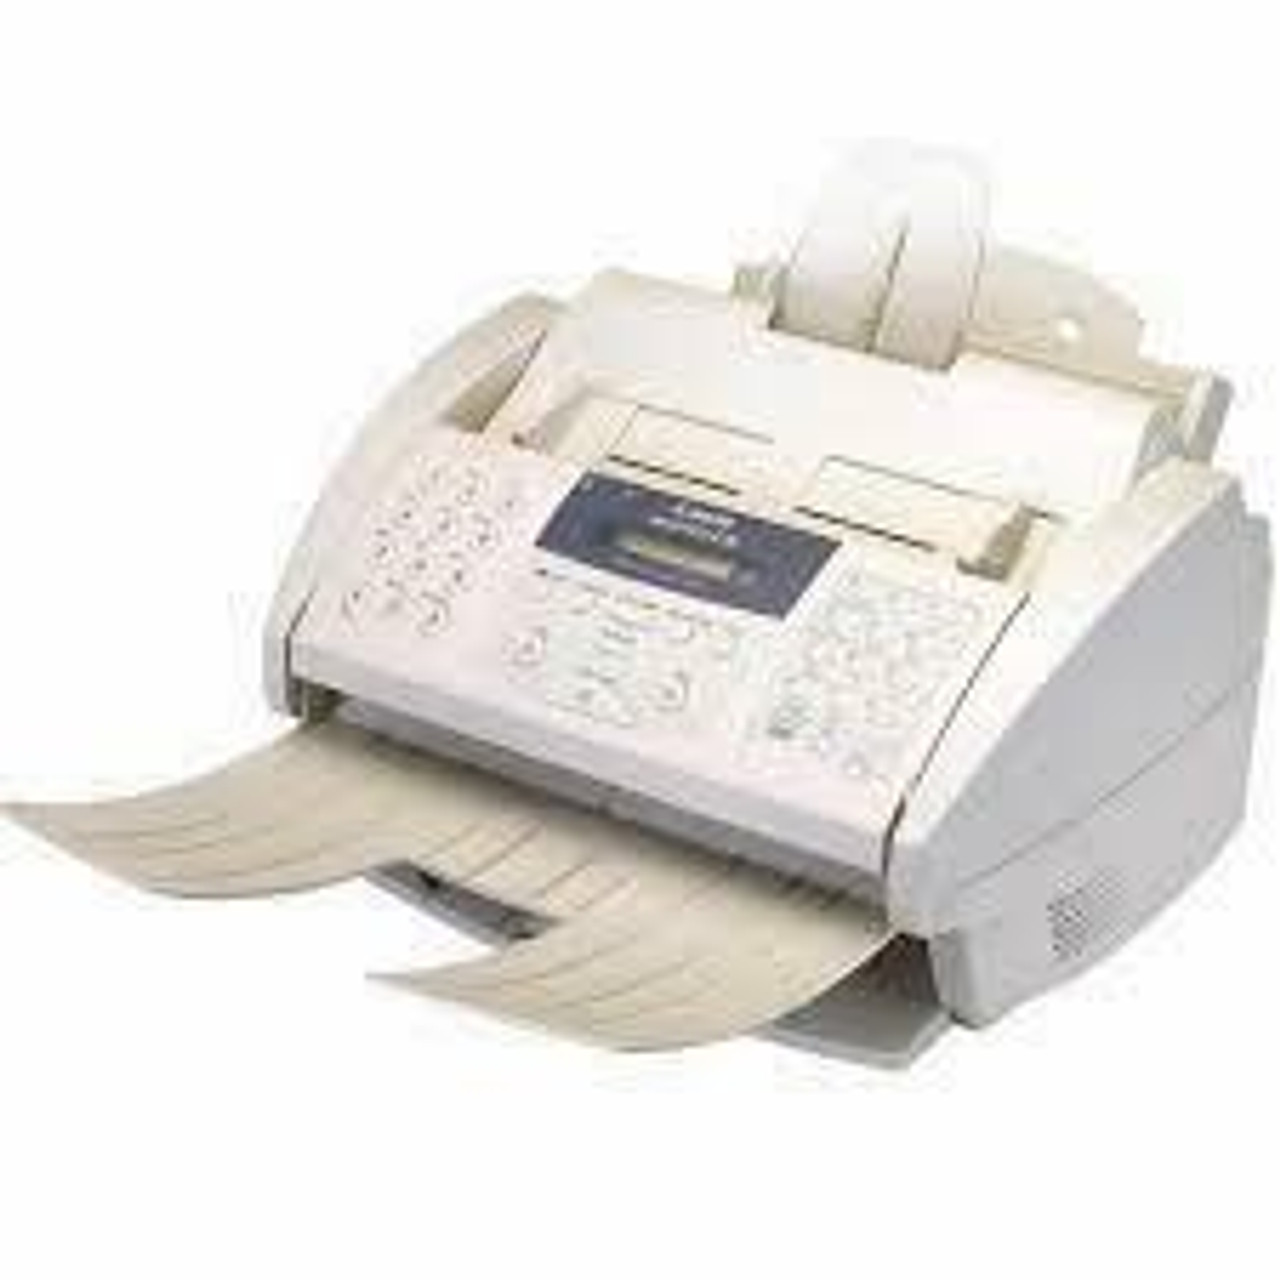 Canon Fax B360if